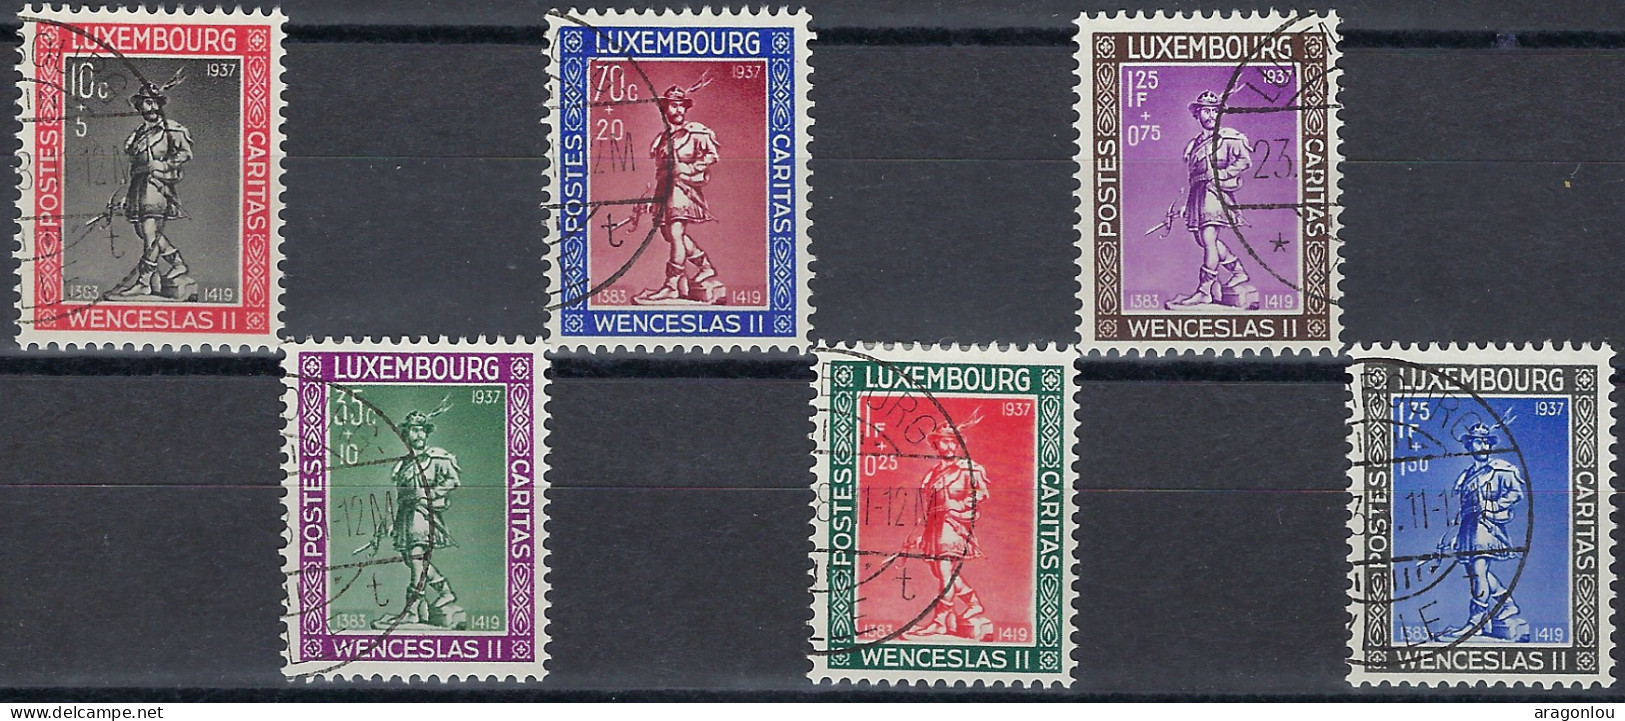 Luxembourg - Luxemburrg - Timbres  1937   Wenzels II      Série   ° - Oblitérés